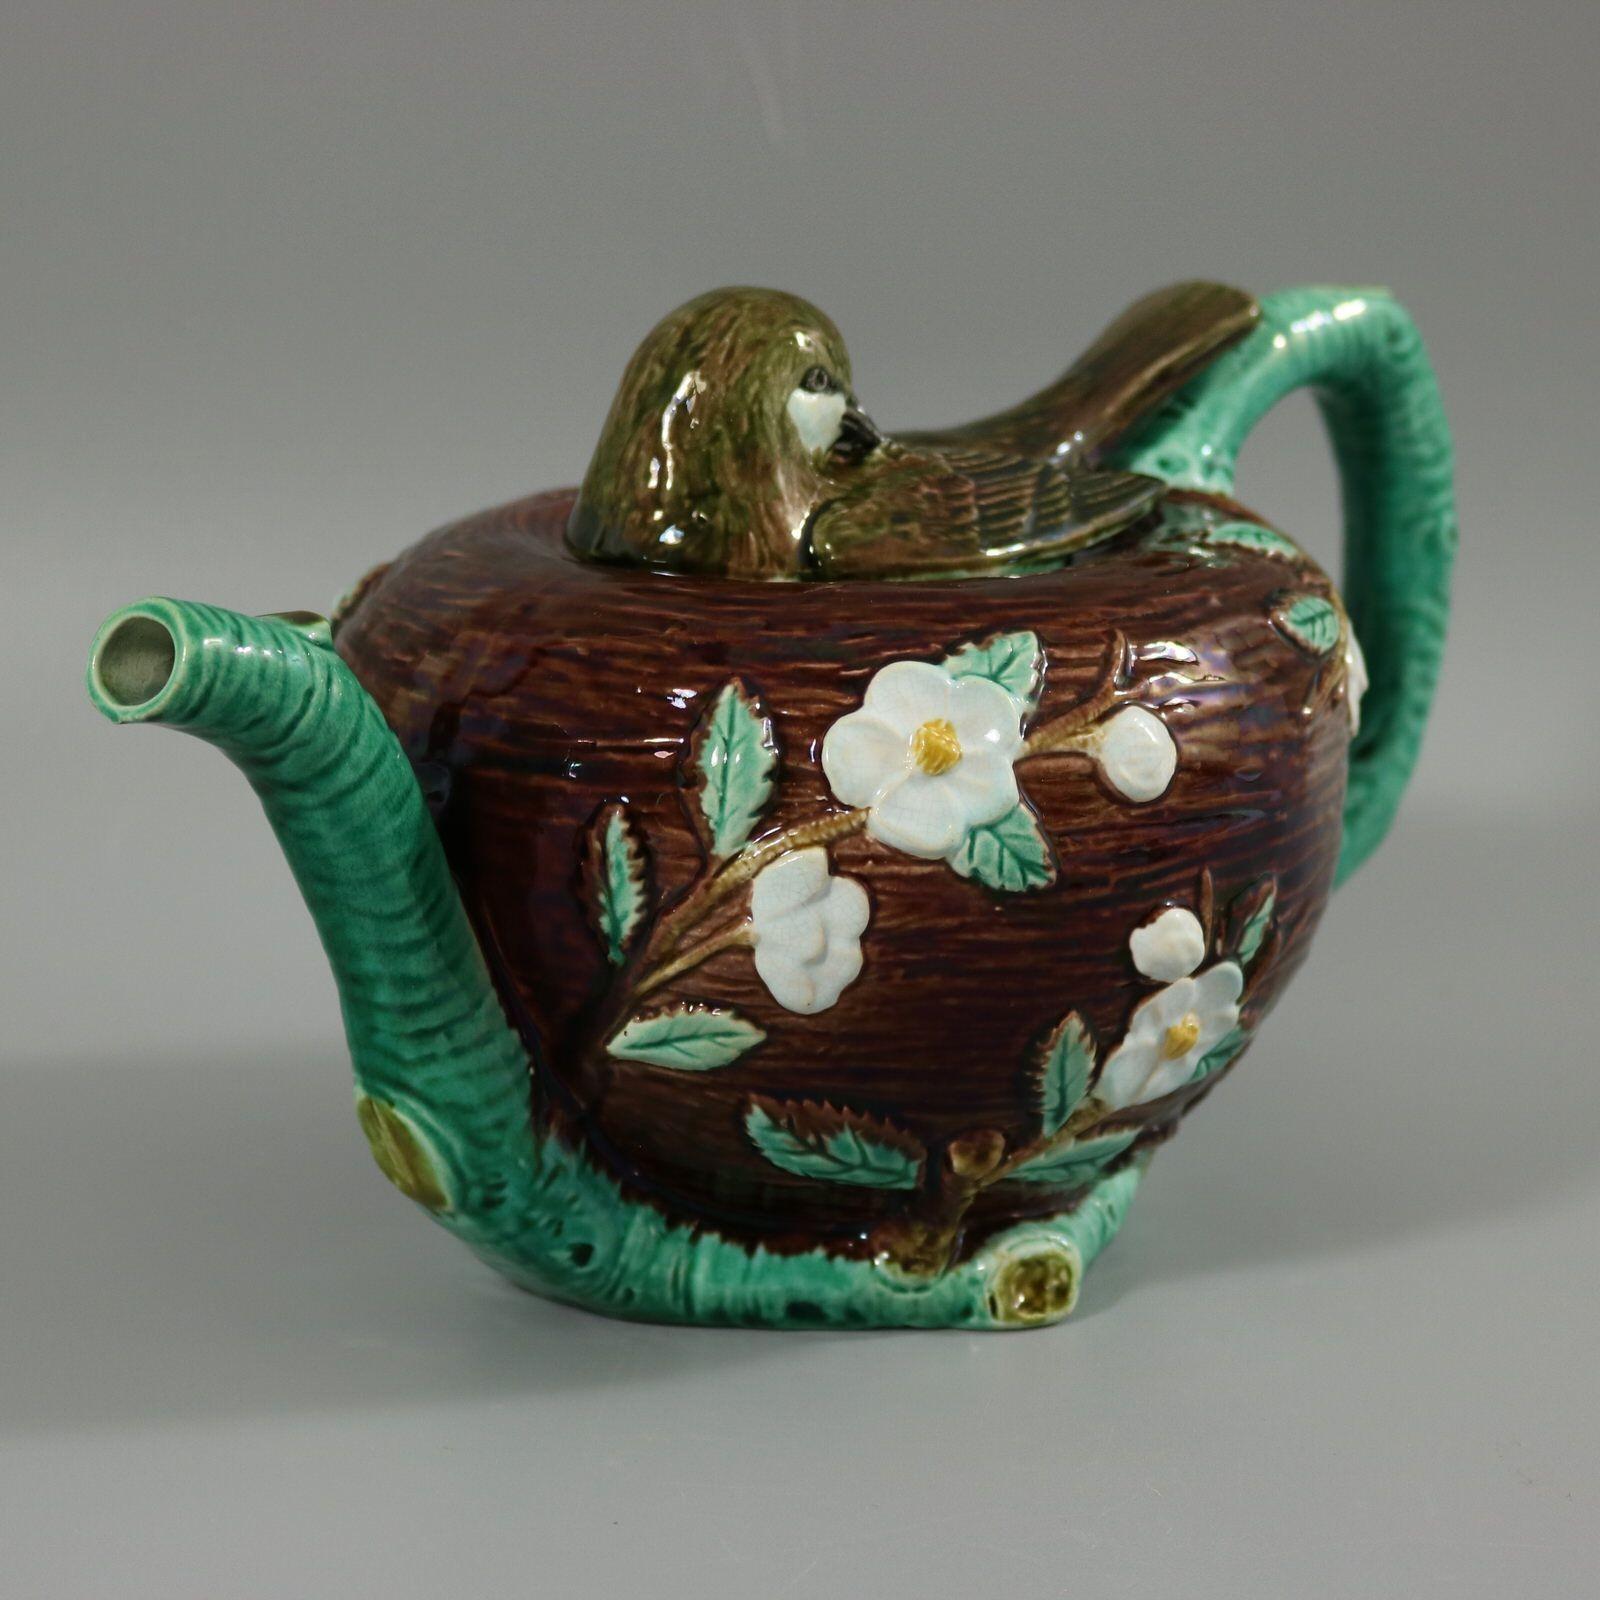 Holdcroft Majolica teapot which features the lid in the form of a bird roosting on its nest. The pot, modelled in the form of the bird nest is embellished with leaves and blossom, which sprout from the naturalistic branch effect handle. Colouration: